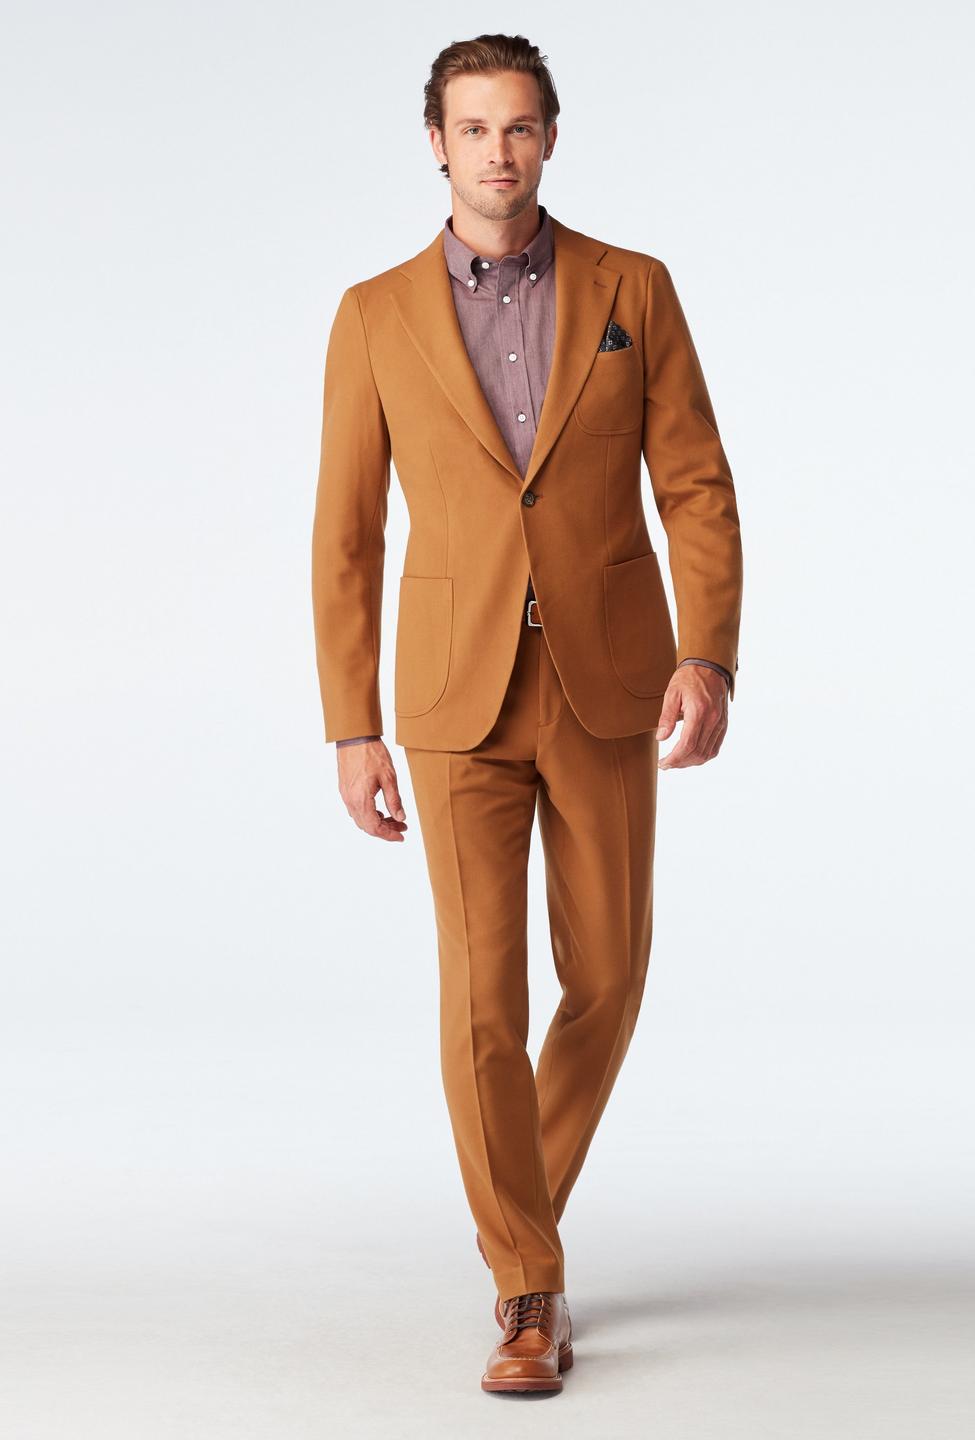 Camel suit - Fleetwood Solid Design from Seasonal Indochino Collection